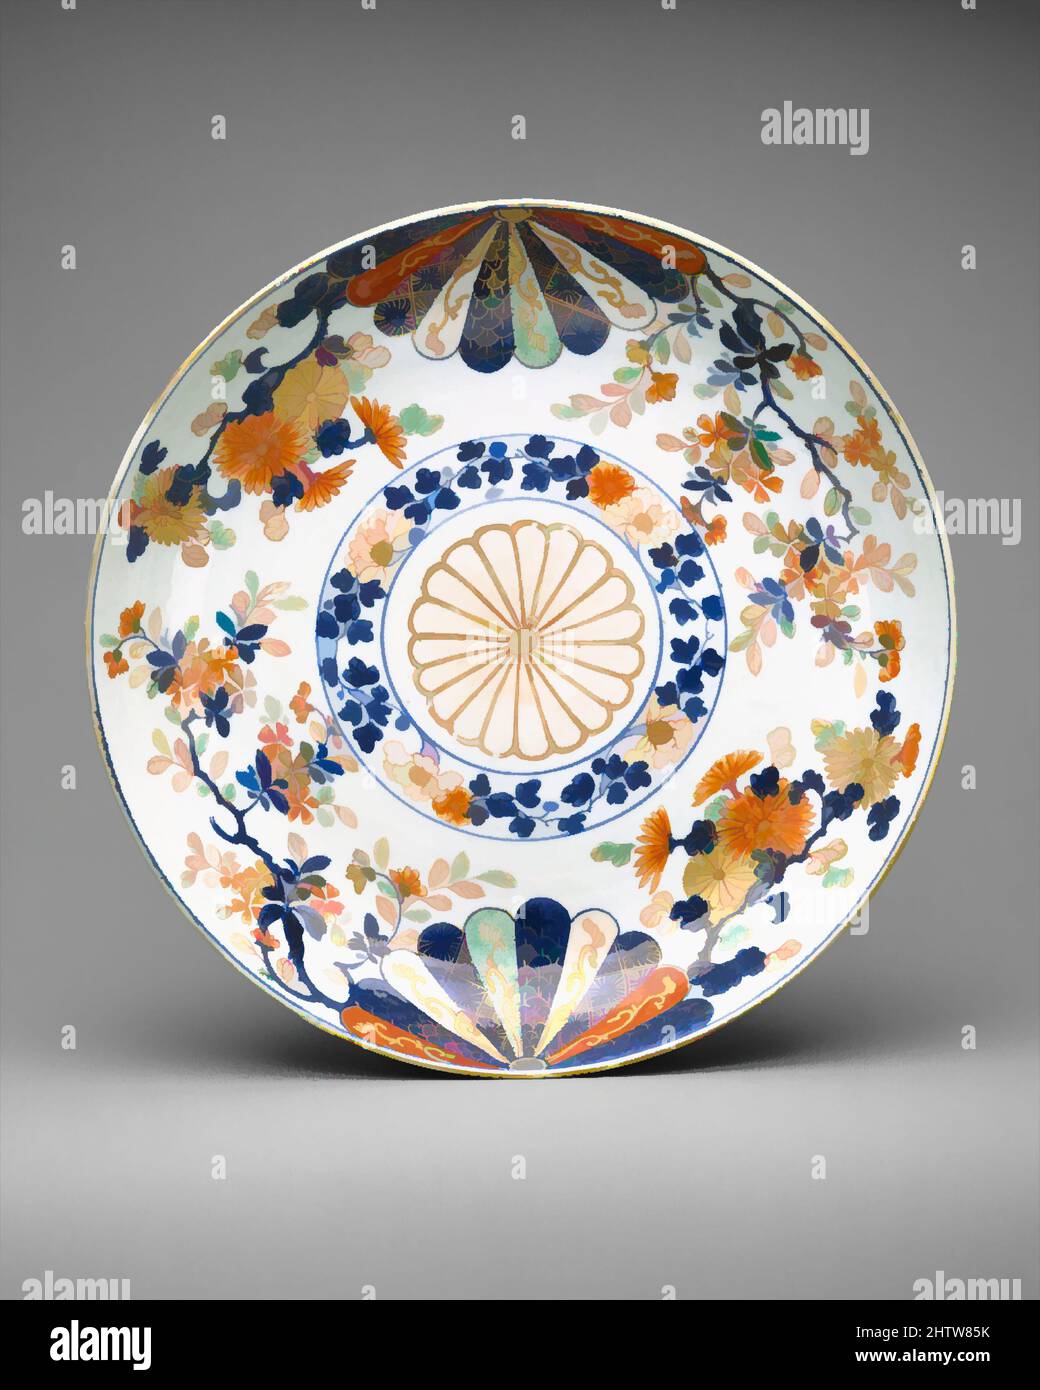 Art inspired by Dish, 1700–1725, Chinese, for European market, Hard-paste porcelain, Diameter: 12 5/16 in. (31.3 cm), Ceramics-Porcelain-Export, Classic works modernized by Artotop with a splash of modernity. Shapes, color and value, eye-catching visual impact on art. Emotions through freedom of artworks in a contemporary way. A timeless message pursuing a wildly creative new direction. Artists turning to the digital medium and creating the Artotop NFT Stock Photo